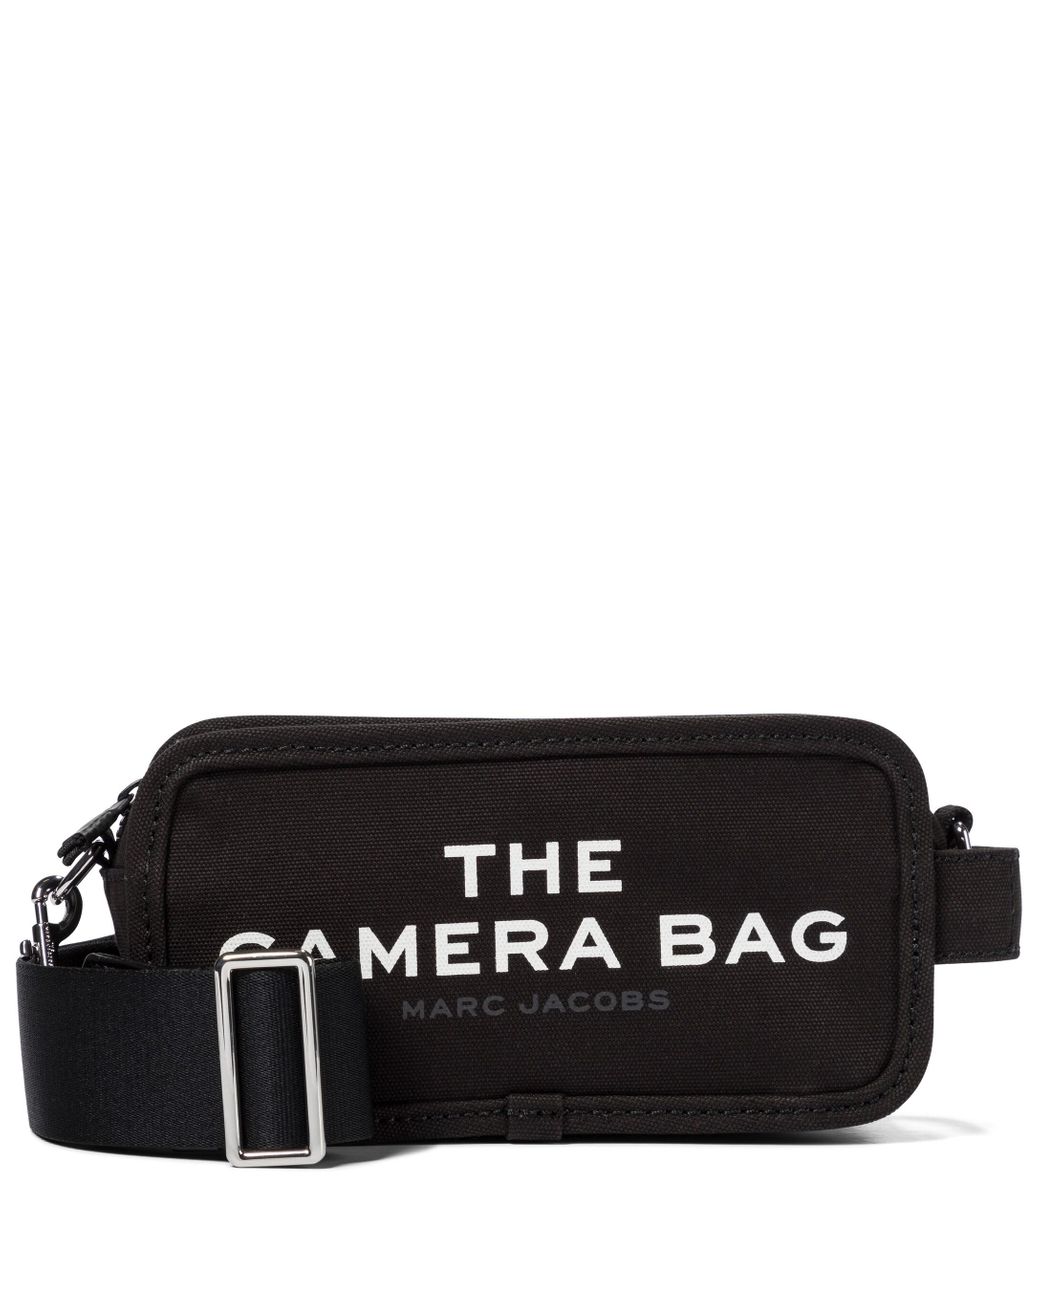 The camera bag Marc Jacobs in canvas